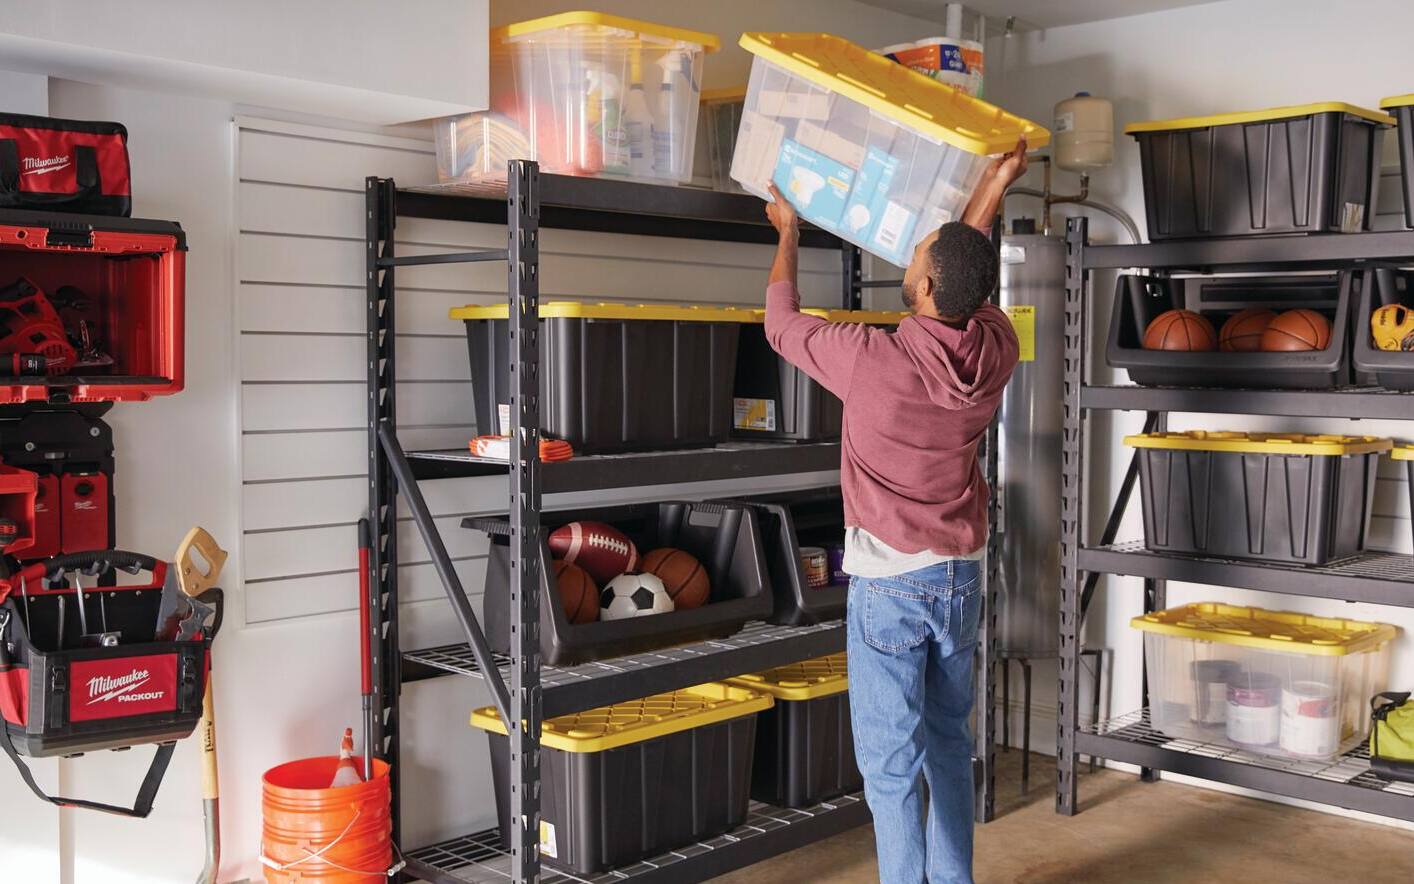 28 Home Organization Stores for All Your Storage Needs